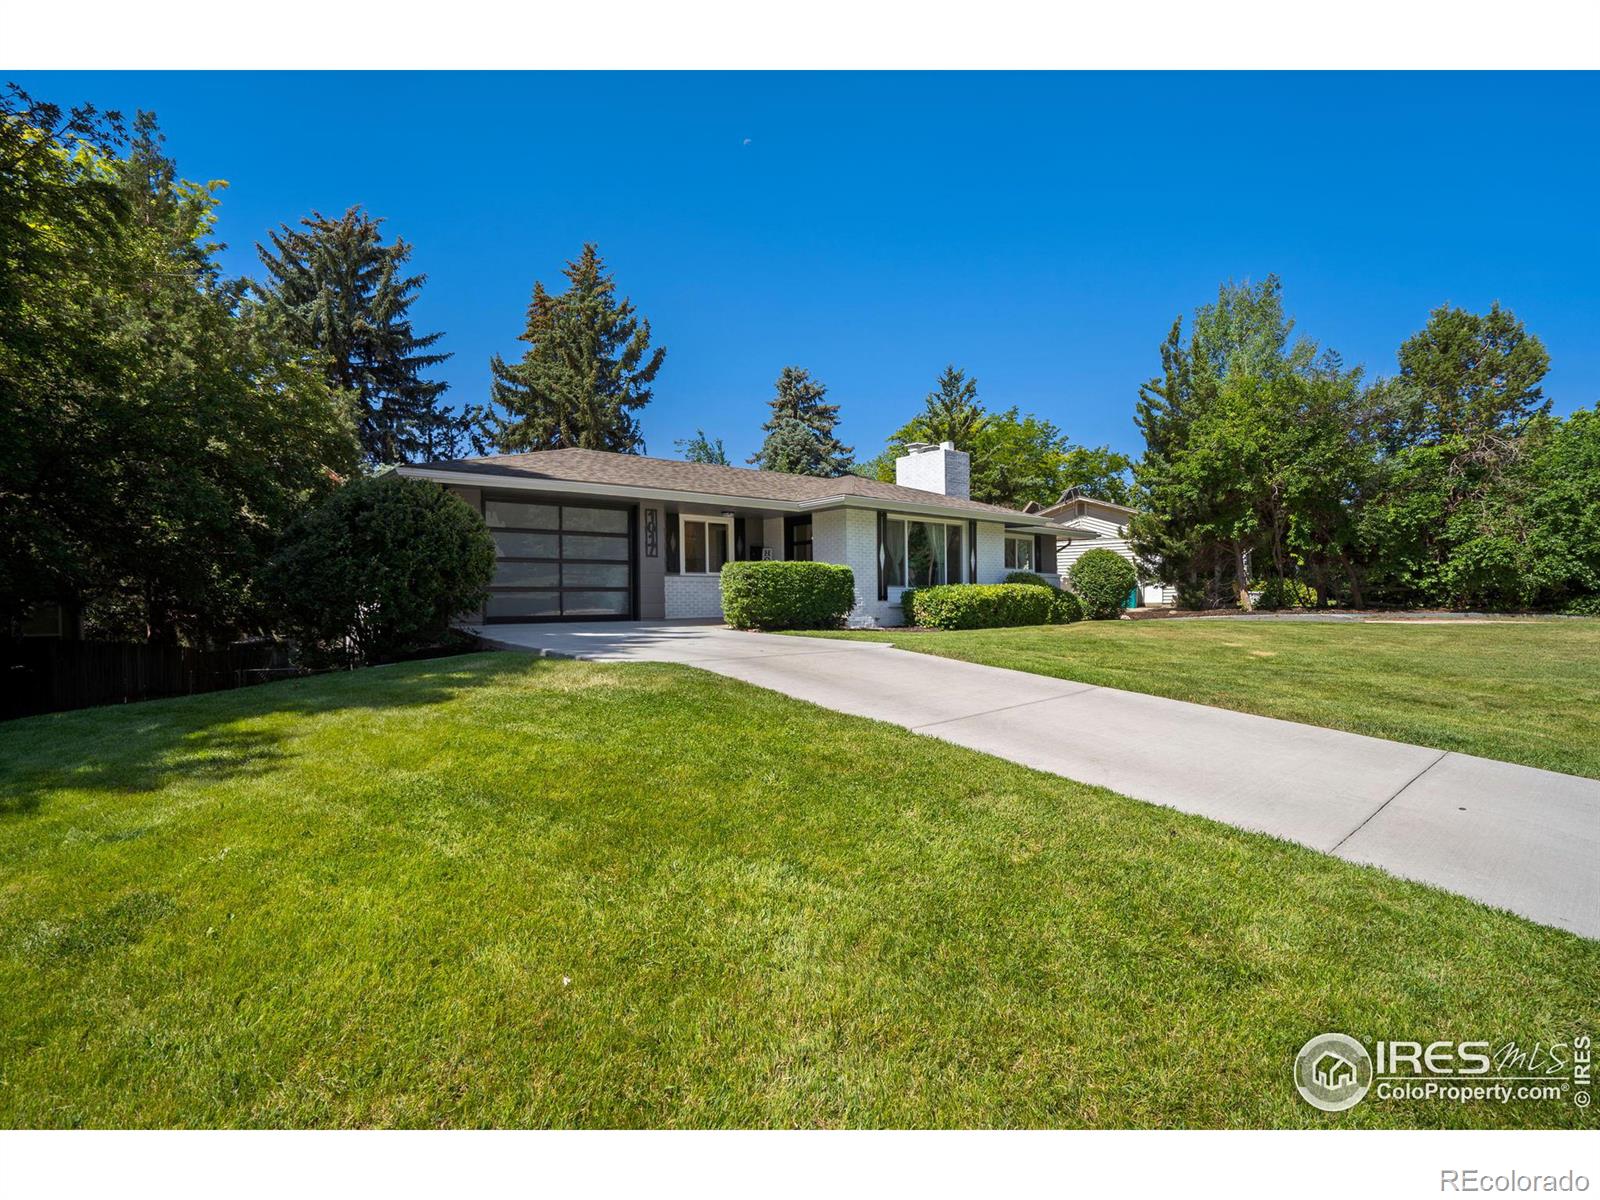 1017 E Lake Street, fort collins MLS: 4567891003215 Beds: 4 Baths: 4 Price: $849,900